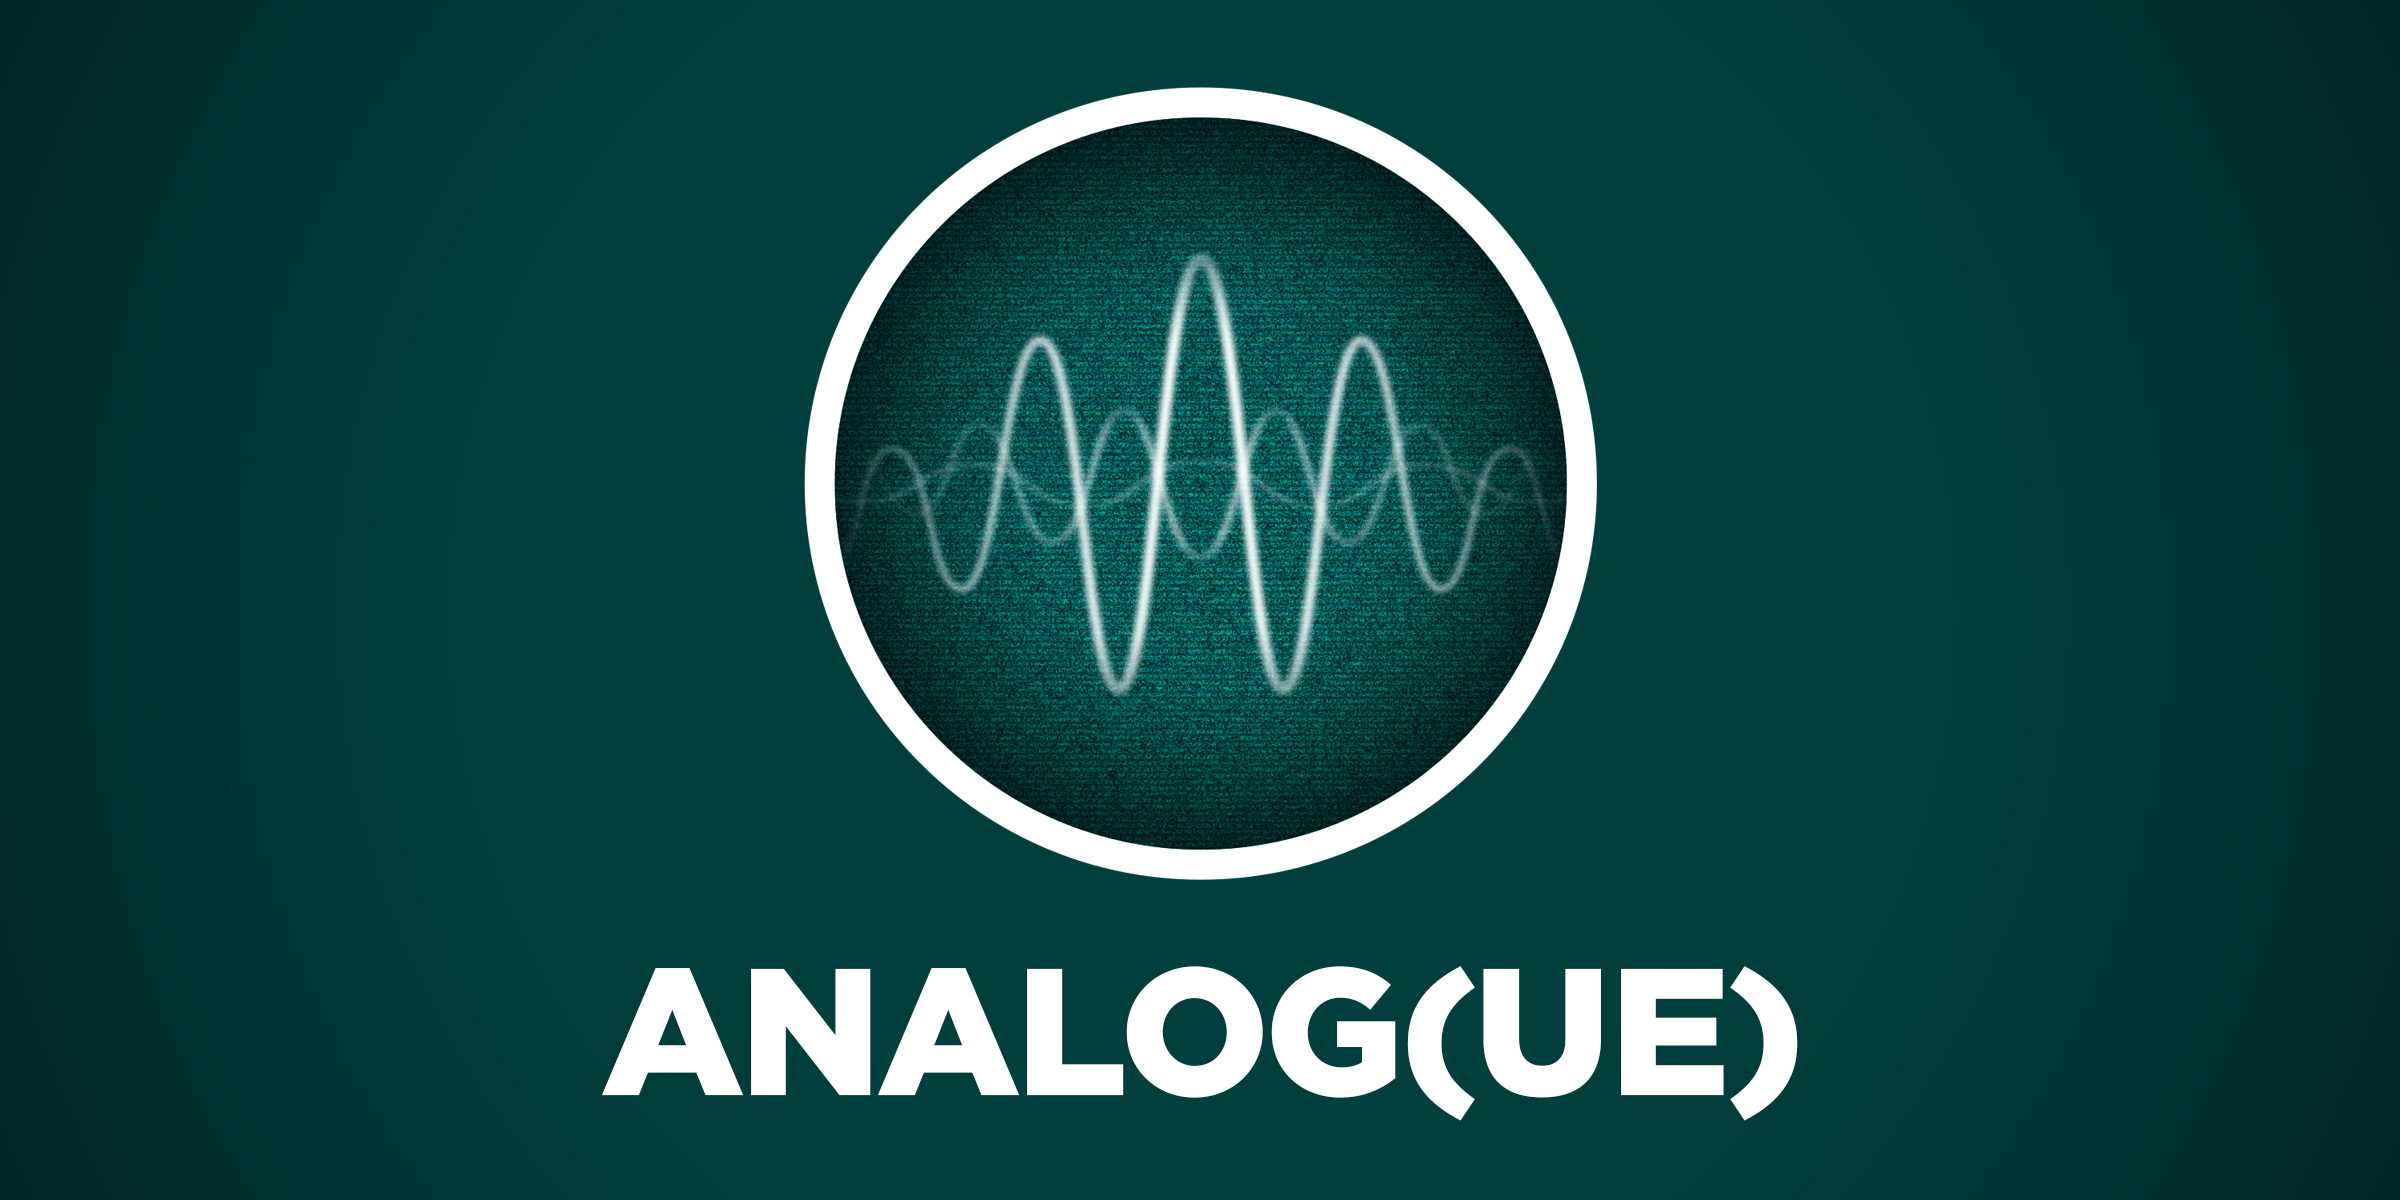 Analog(ue) #175: I Will Rearrange My Life for You